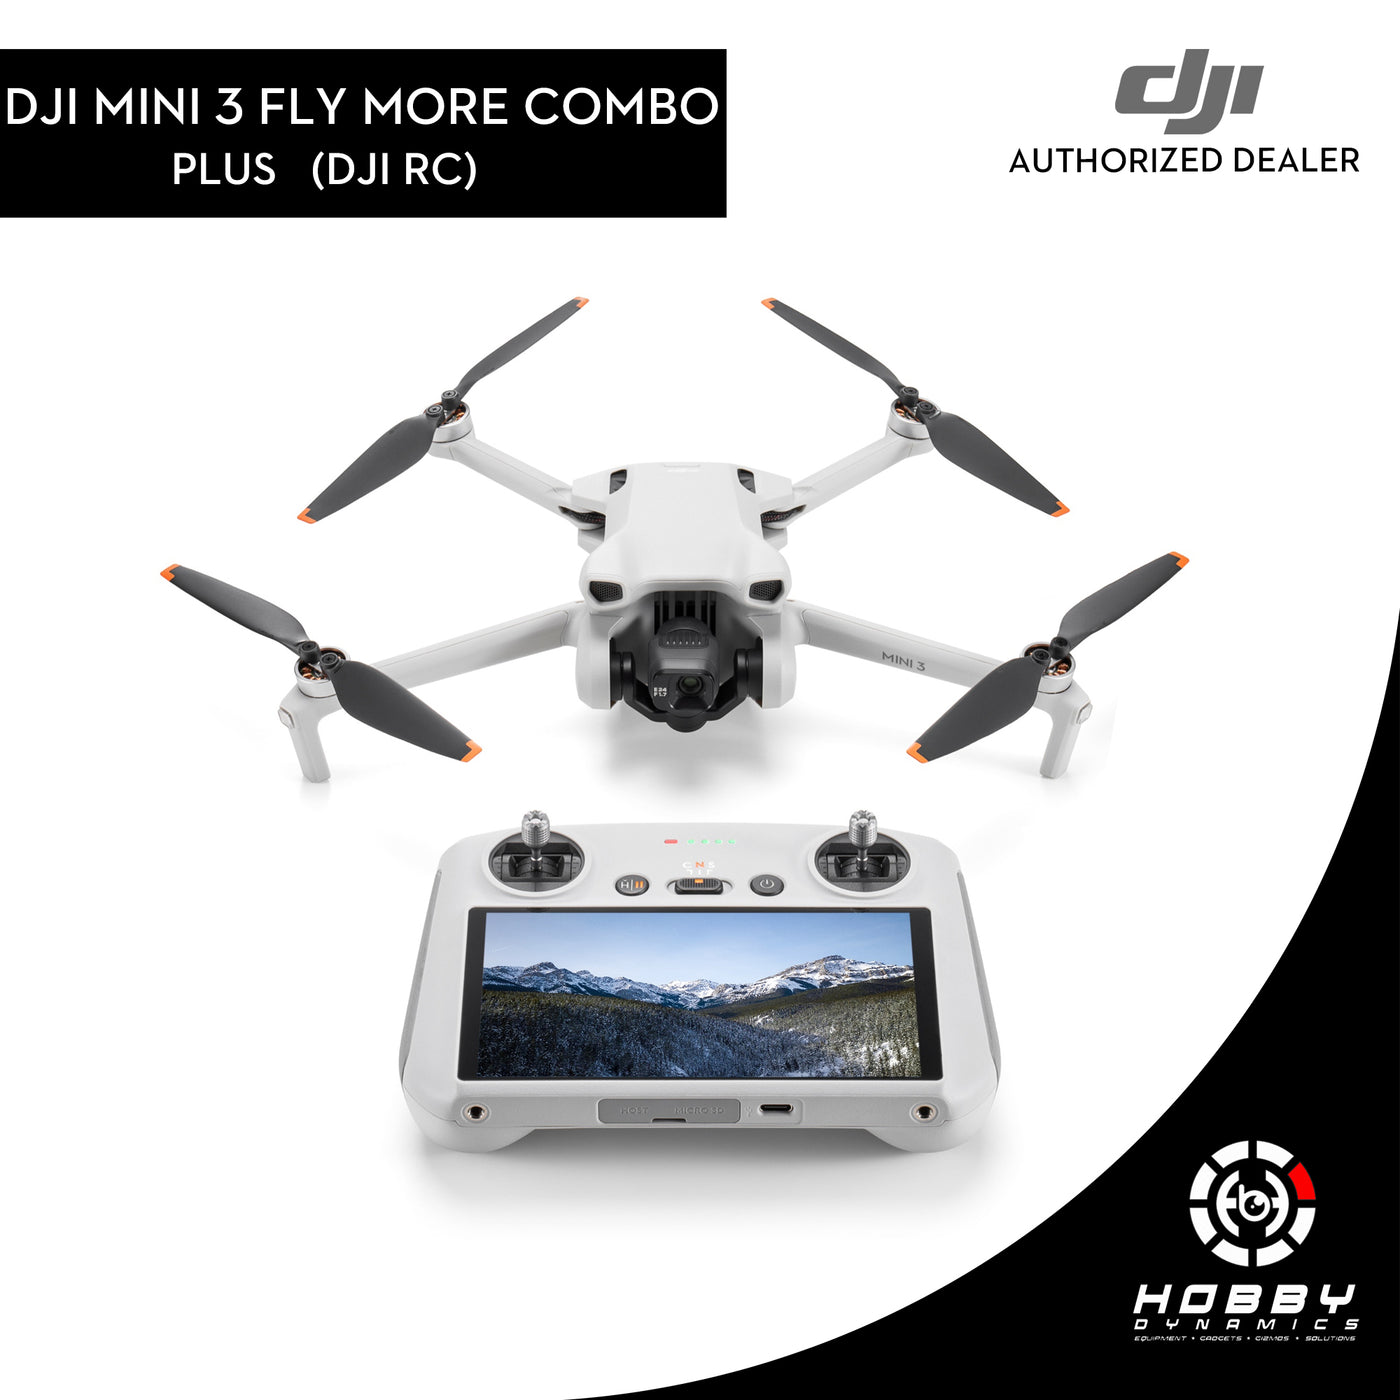 DJI Mini 3 Fly More Combo Plus (DJI RC) with FREE Sandisk Extreme 64GB SD Card